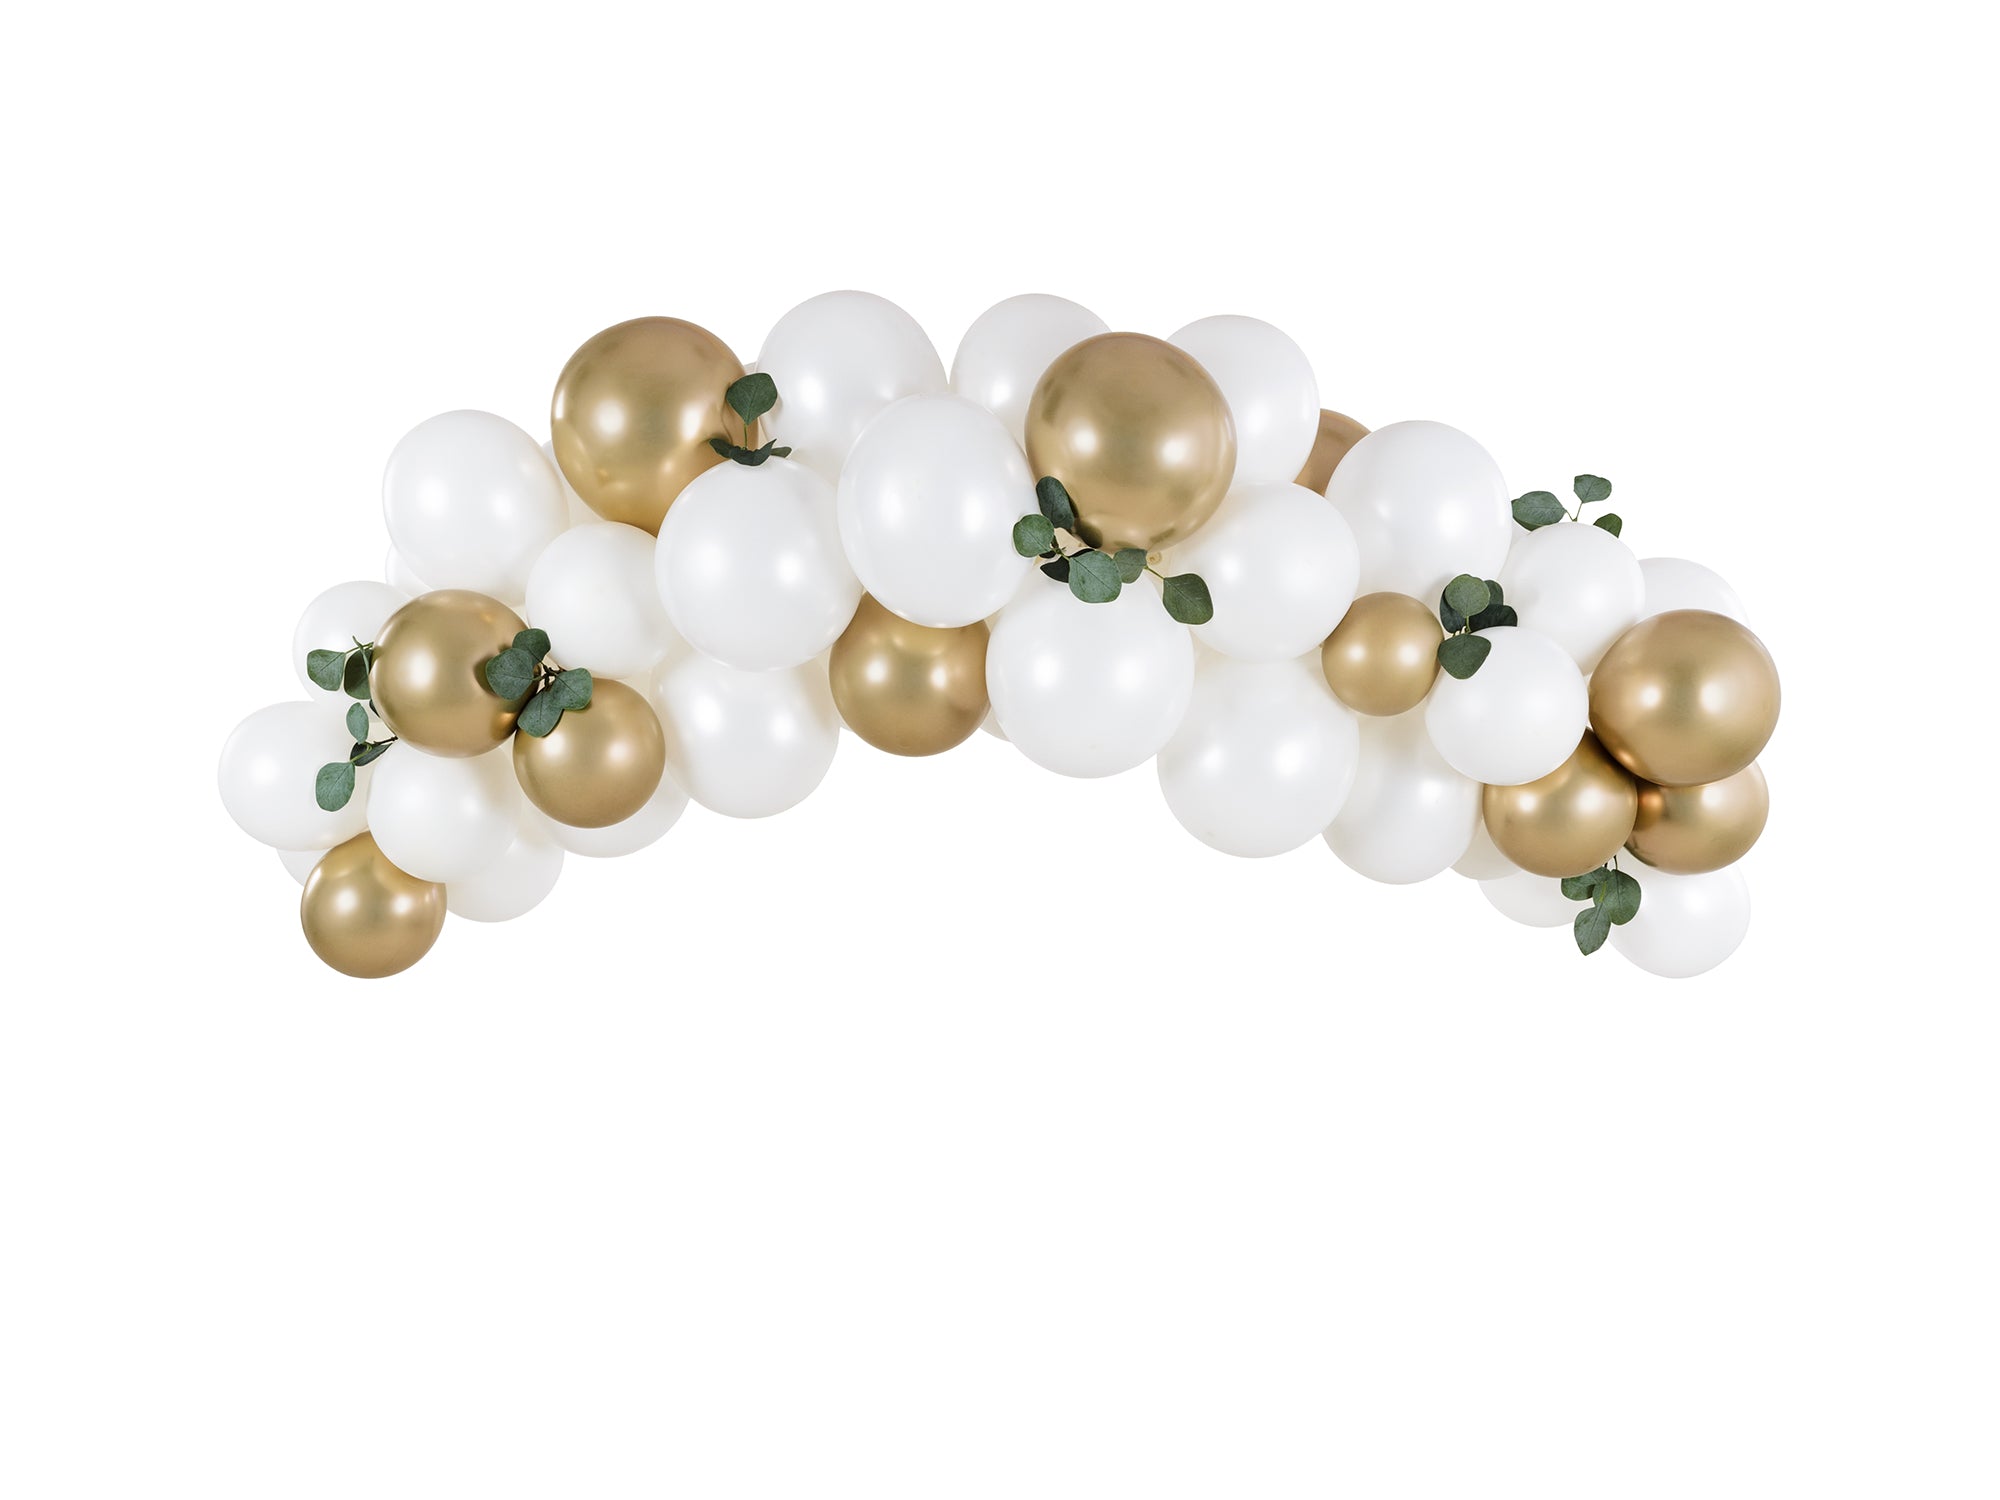 Balloon garland White and Gold, 200cm